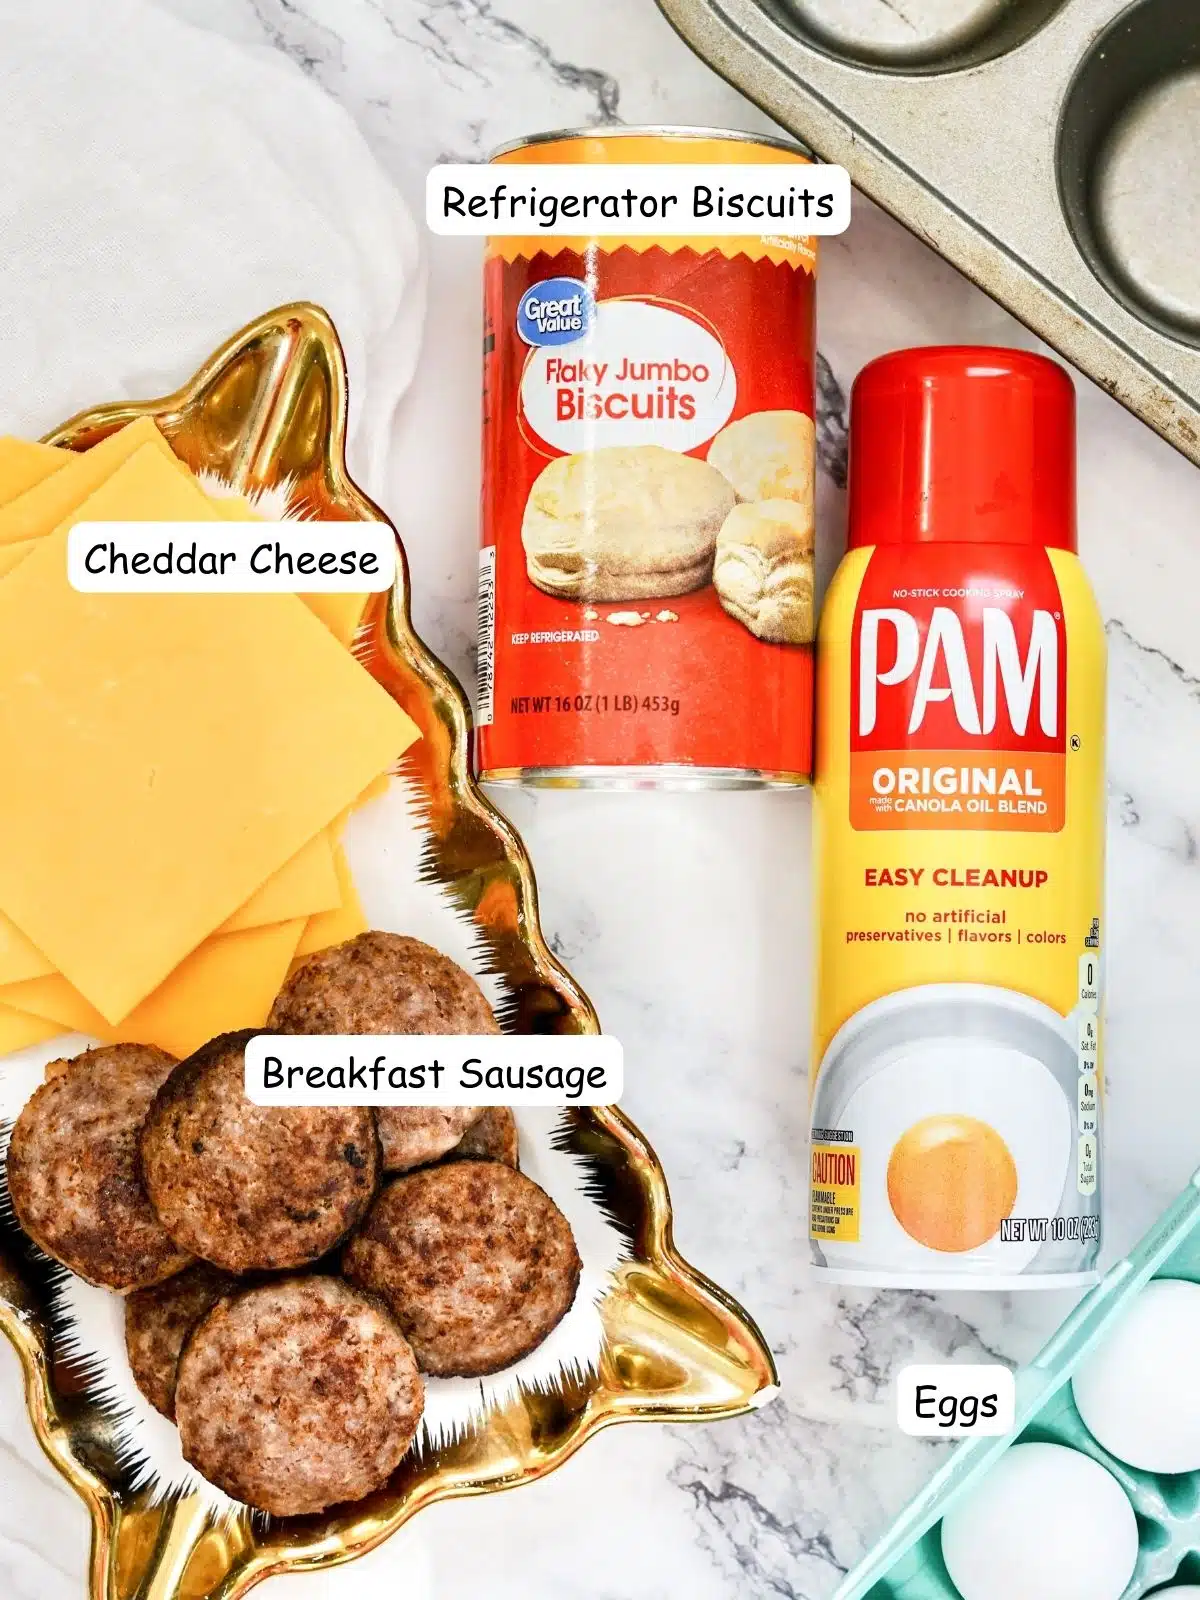 ingredients, refrigerator biscuits, sausage patties, eggs, cheese and Pam cooking spray.